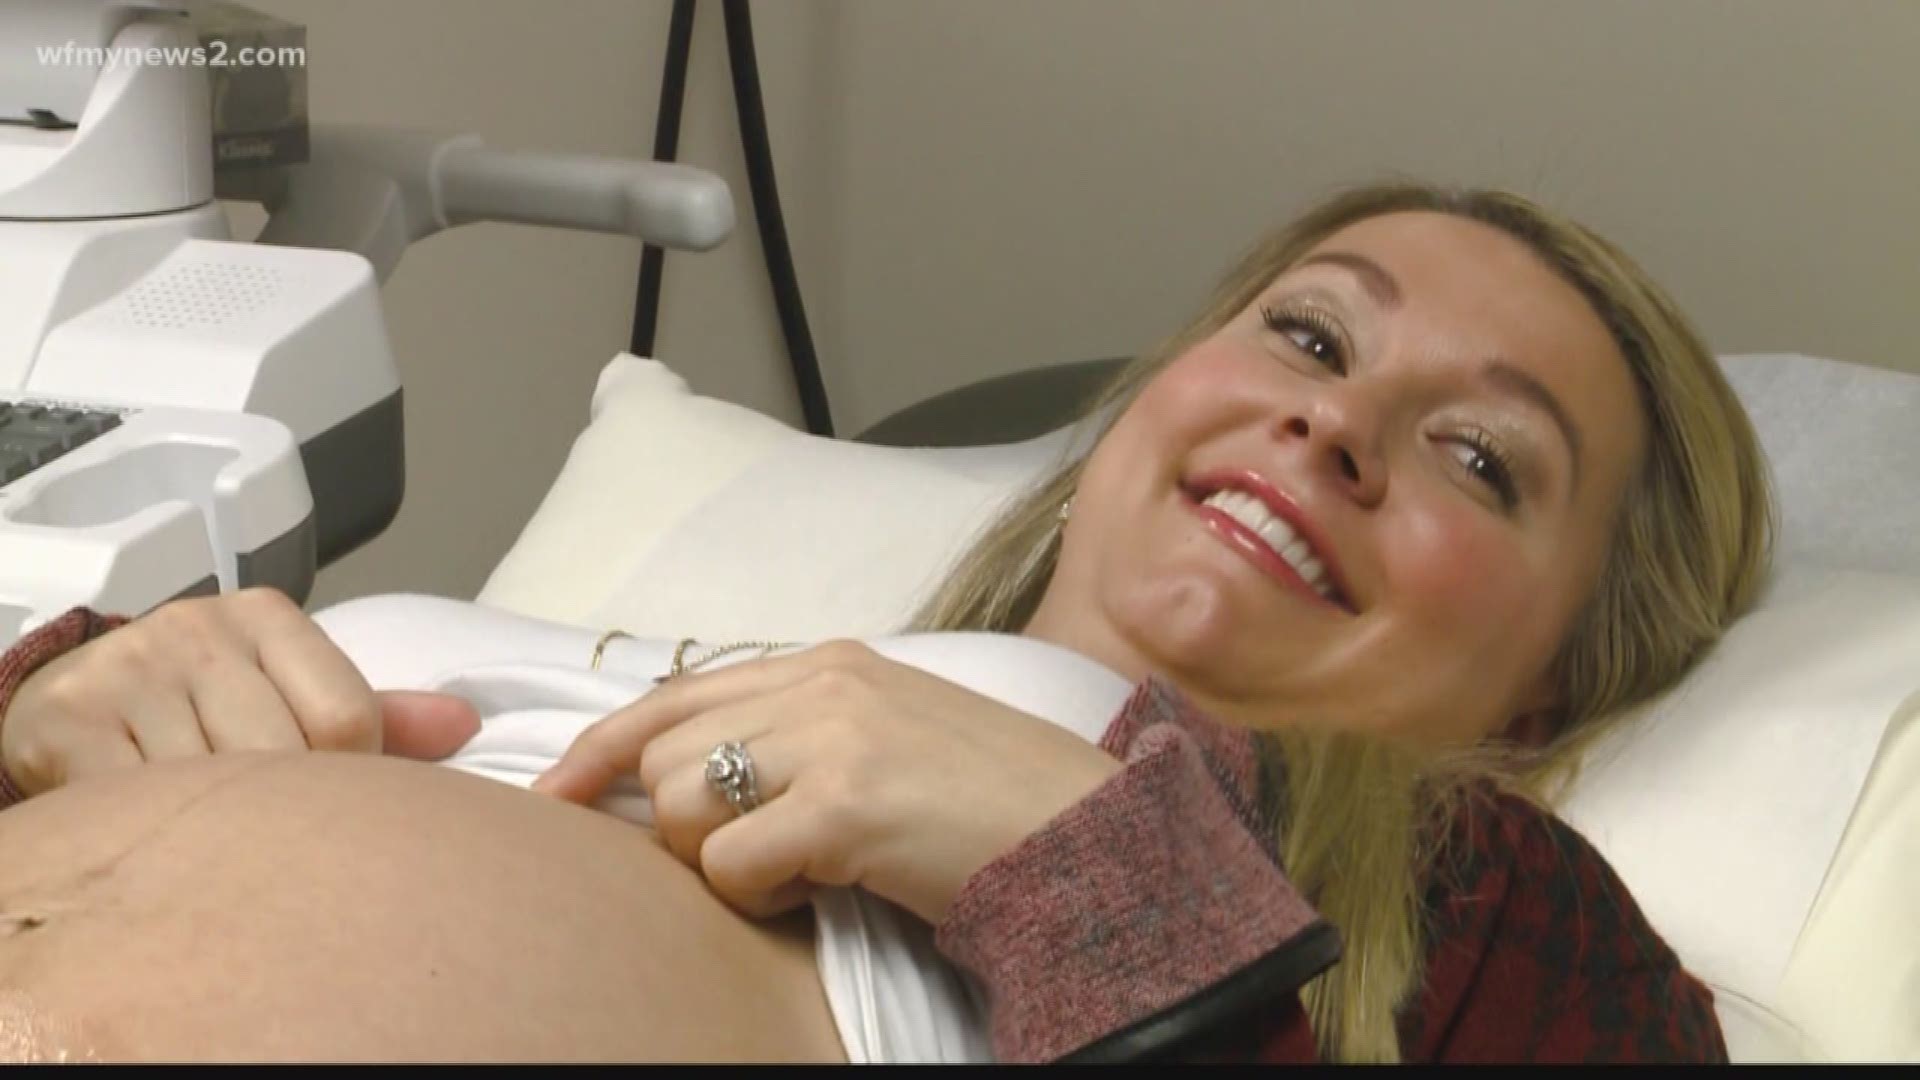 A growing number of expecting women are opting to use laughing gas instead of epidurals during delivery.